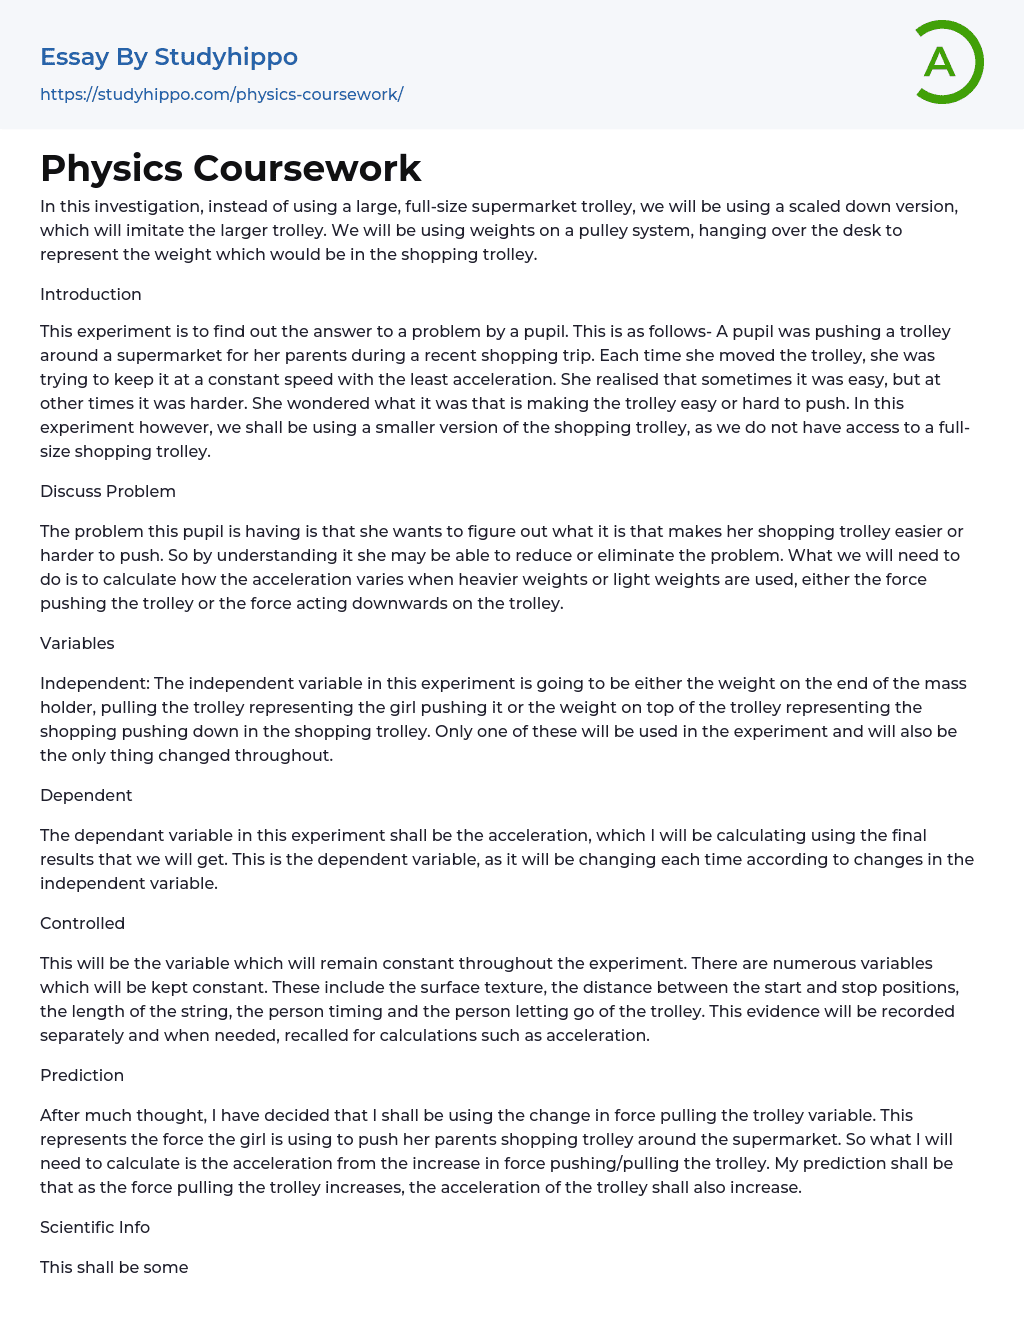 physics coursework example